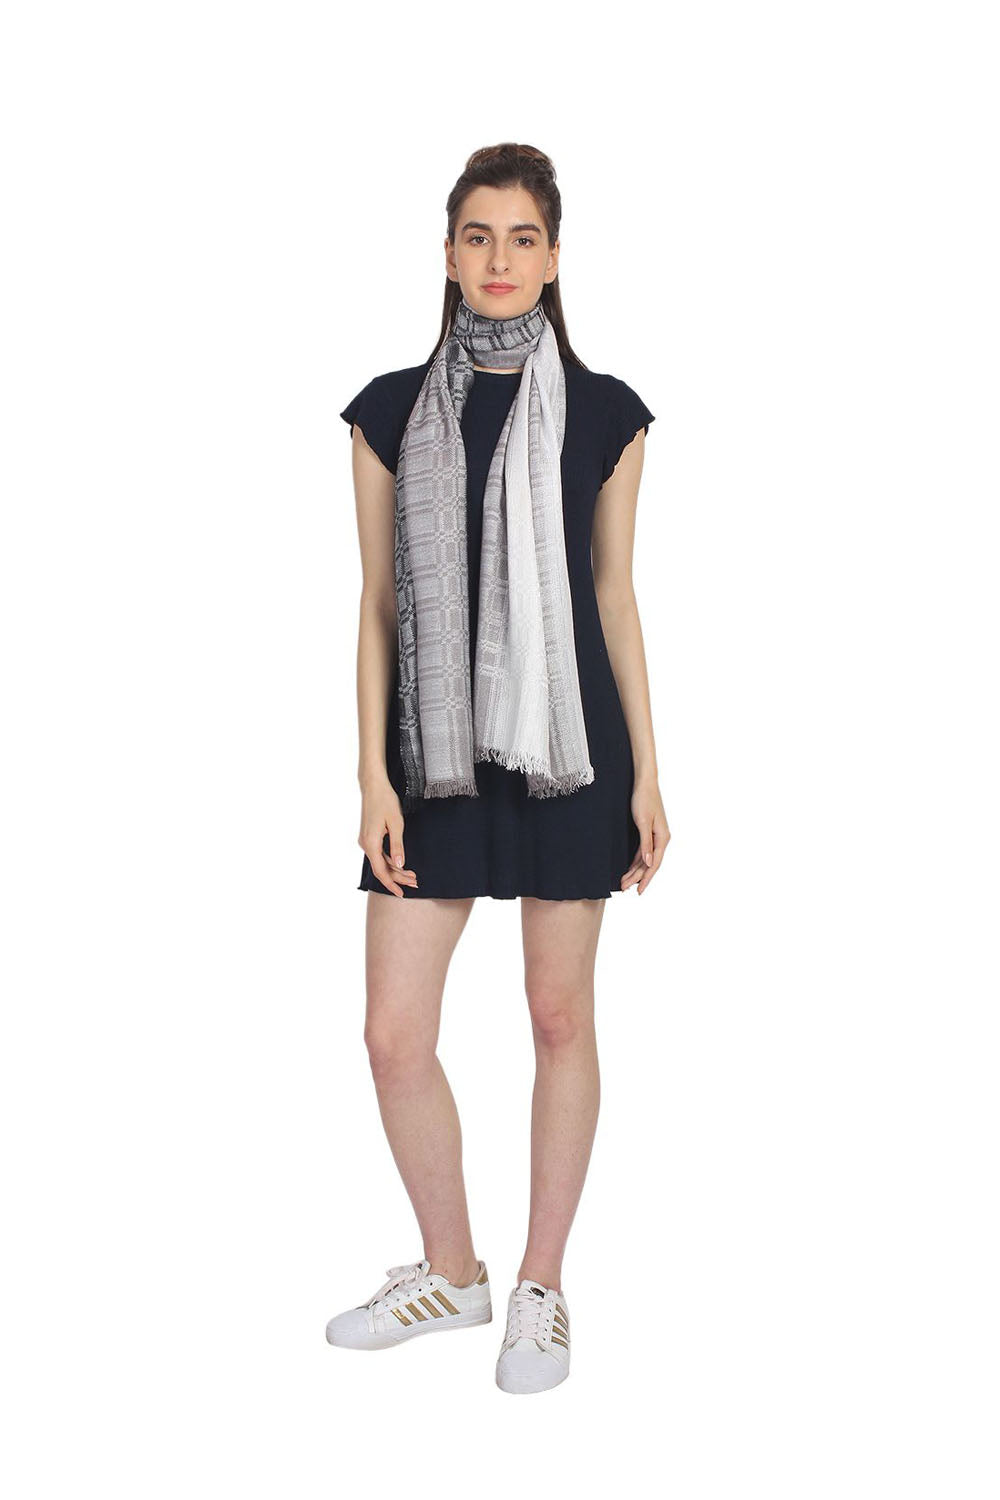 Viscose Stole in Grey, White And Black